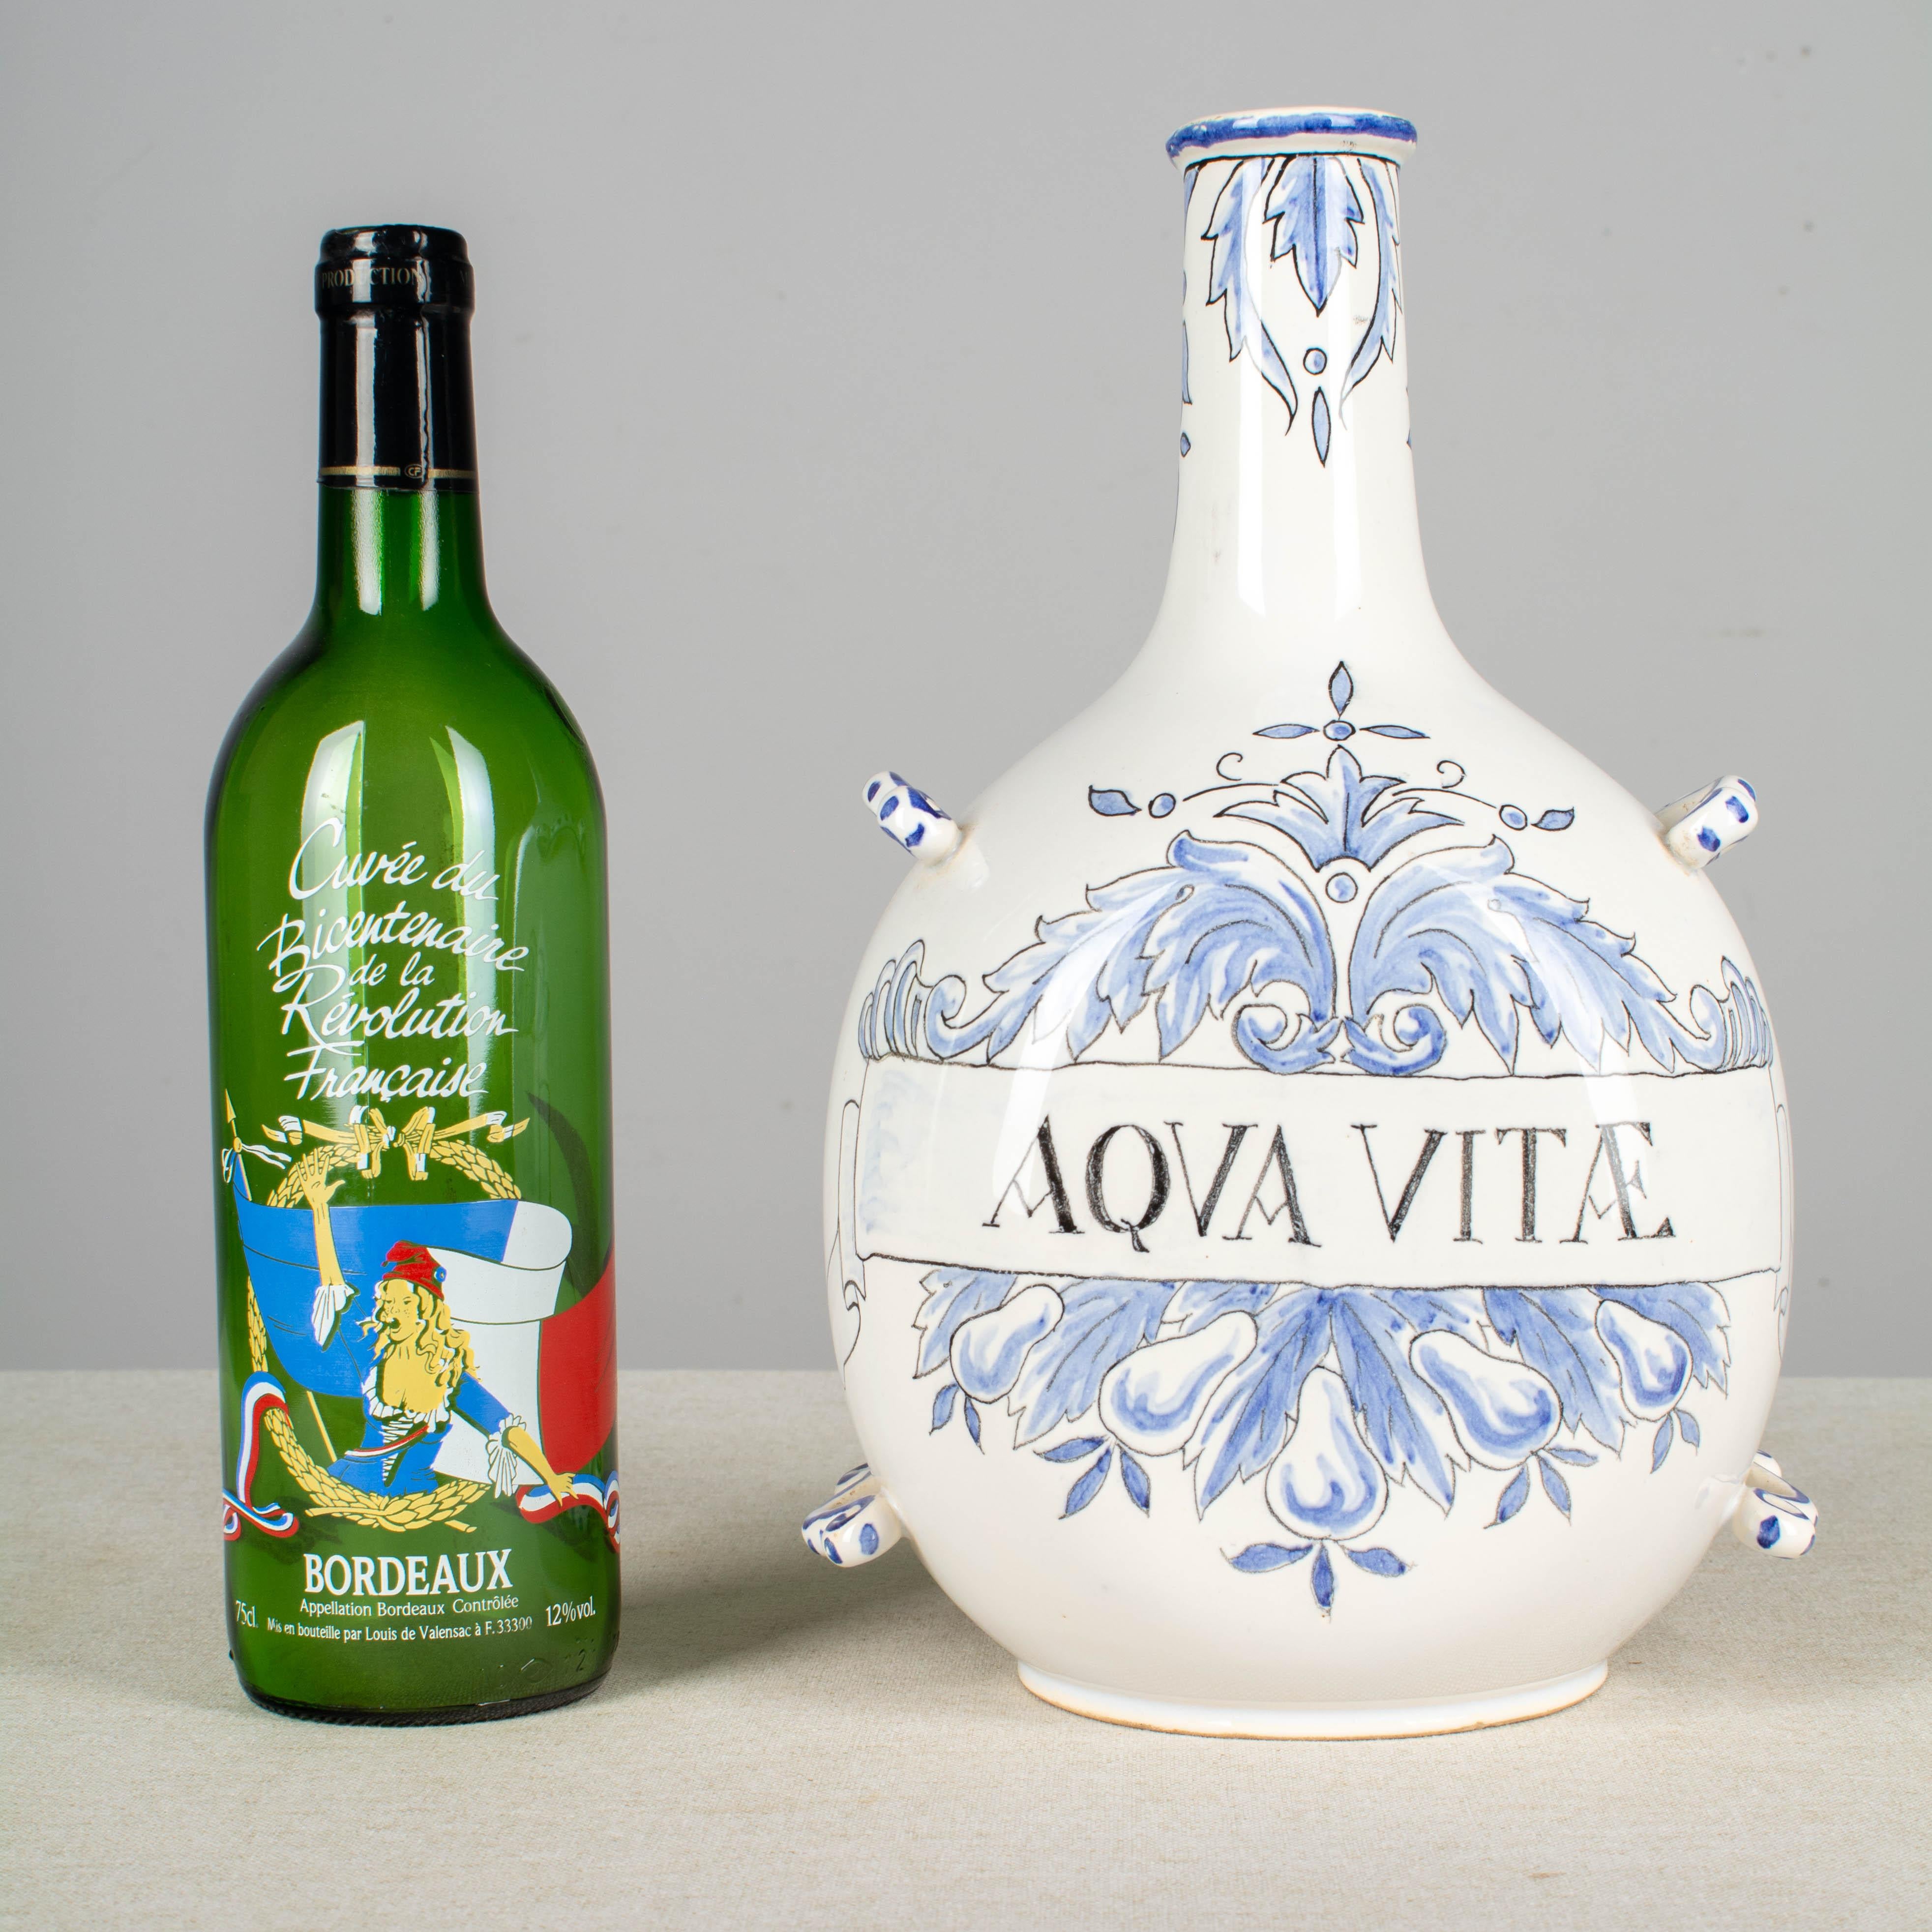 An Italian ceramic jug, or bottle, hand painted in pale blue with the label 